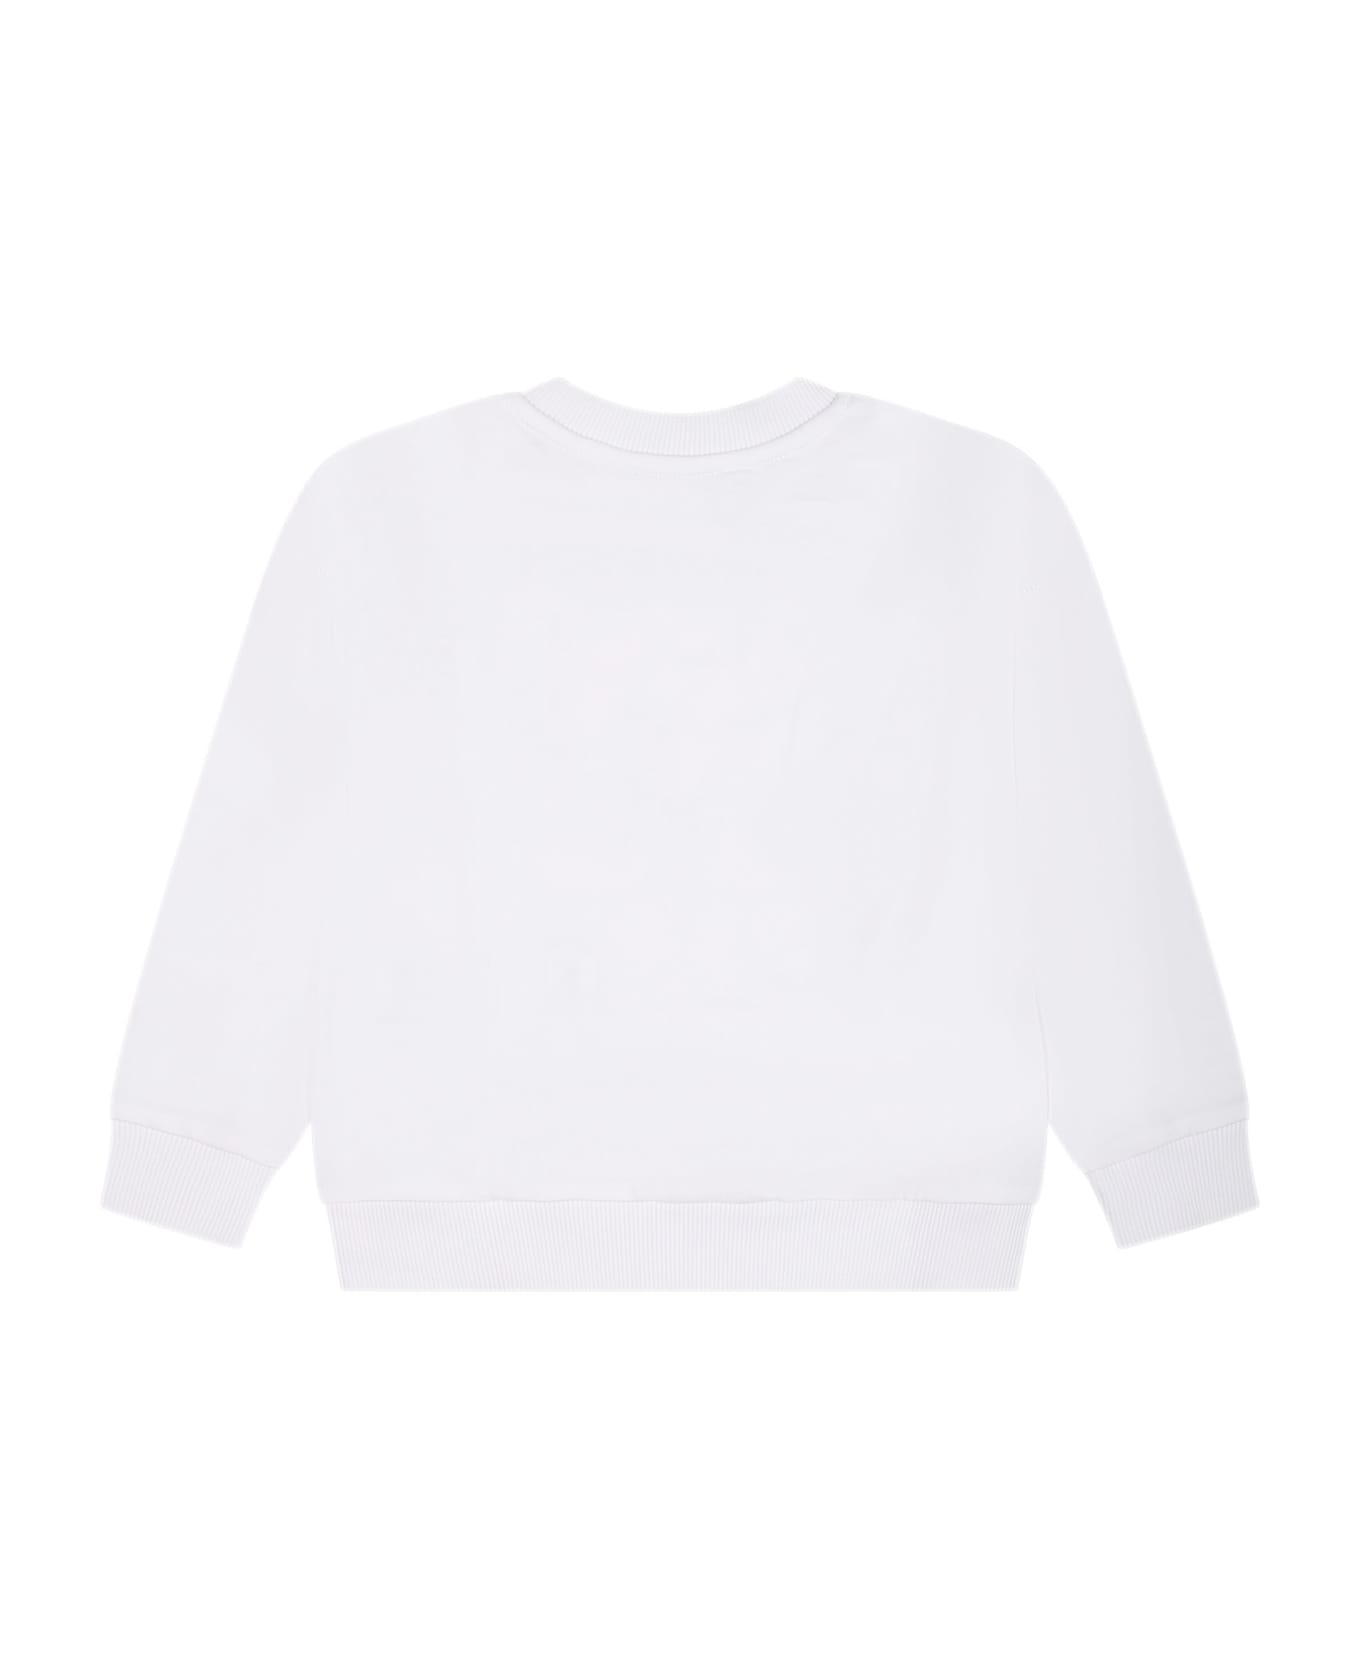 Moschino White Sweatshirt For Babies With Teddy Bear - White